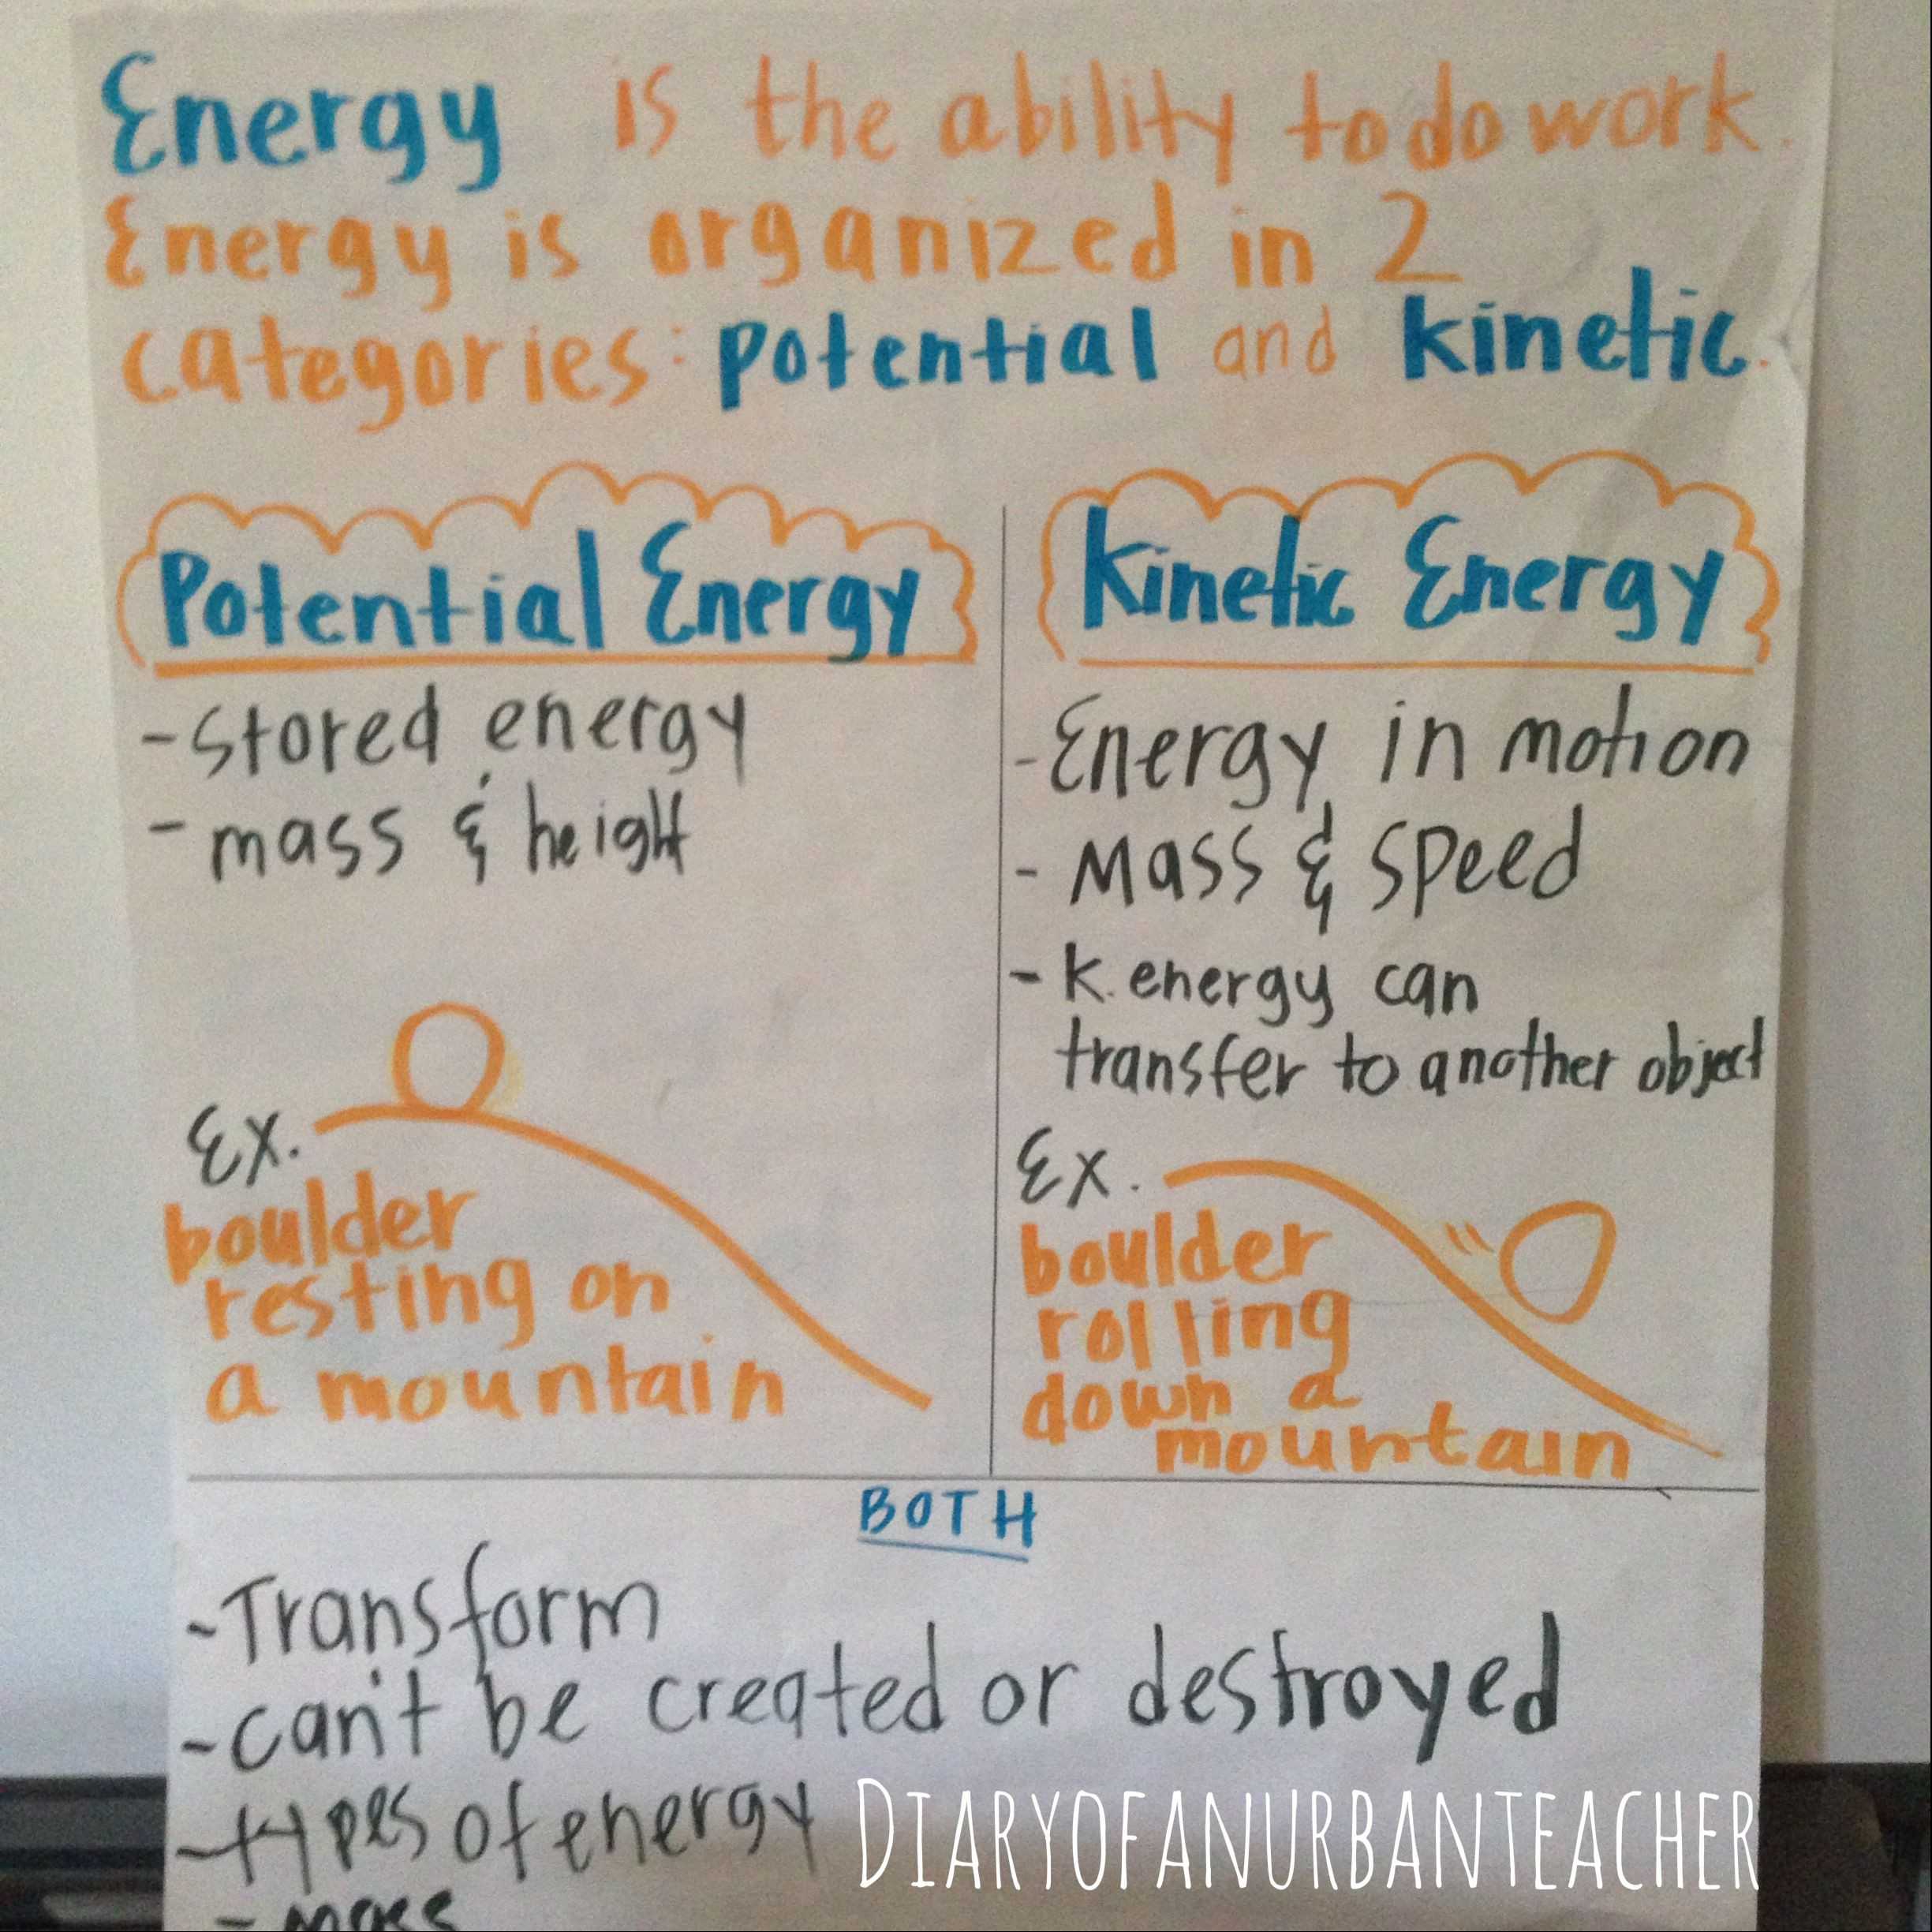 Energy Transformation Worksheet Answers as Well as Conservation Energy Worksheet Answers Awesome Potential and